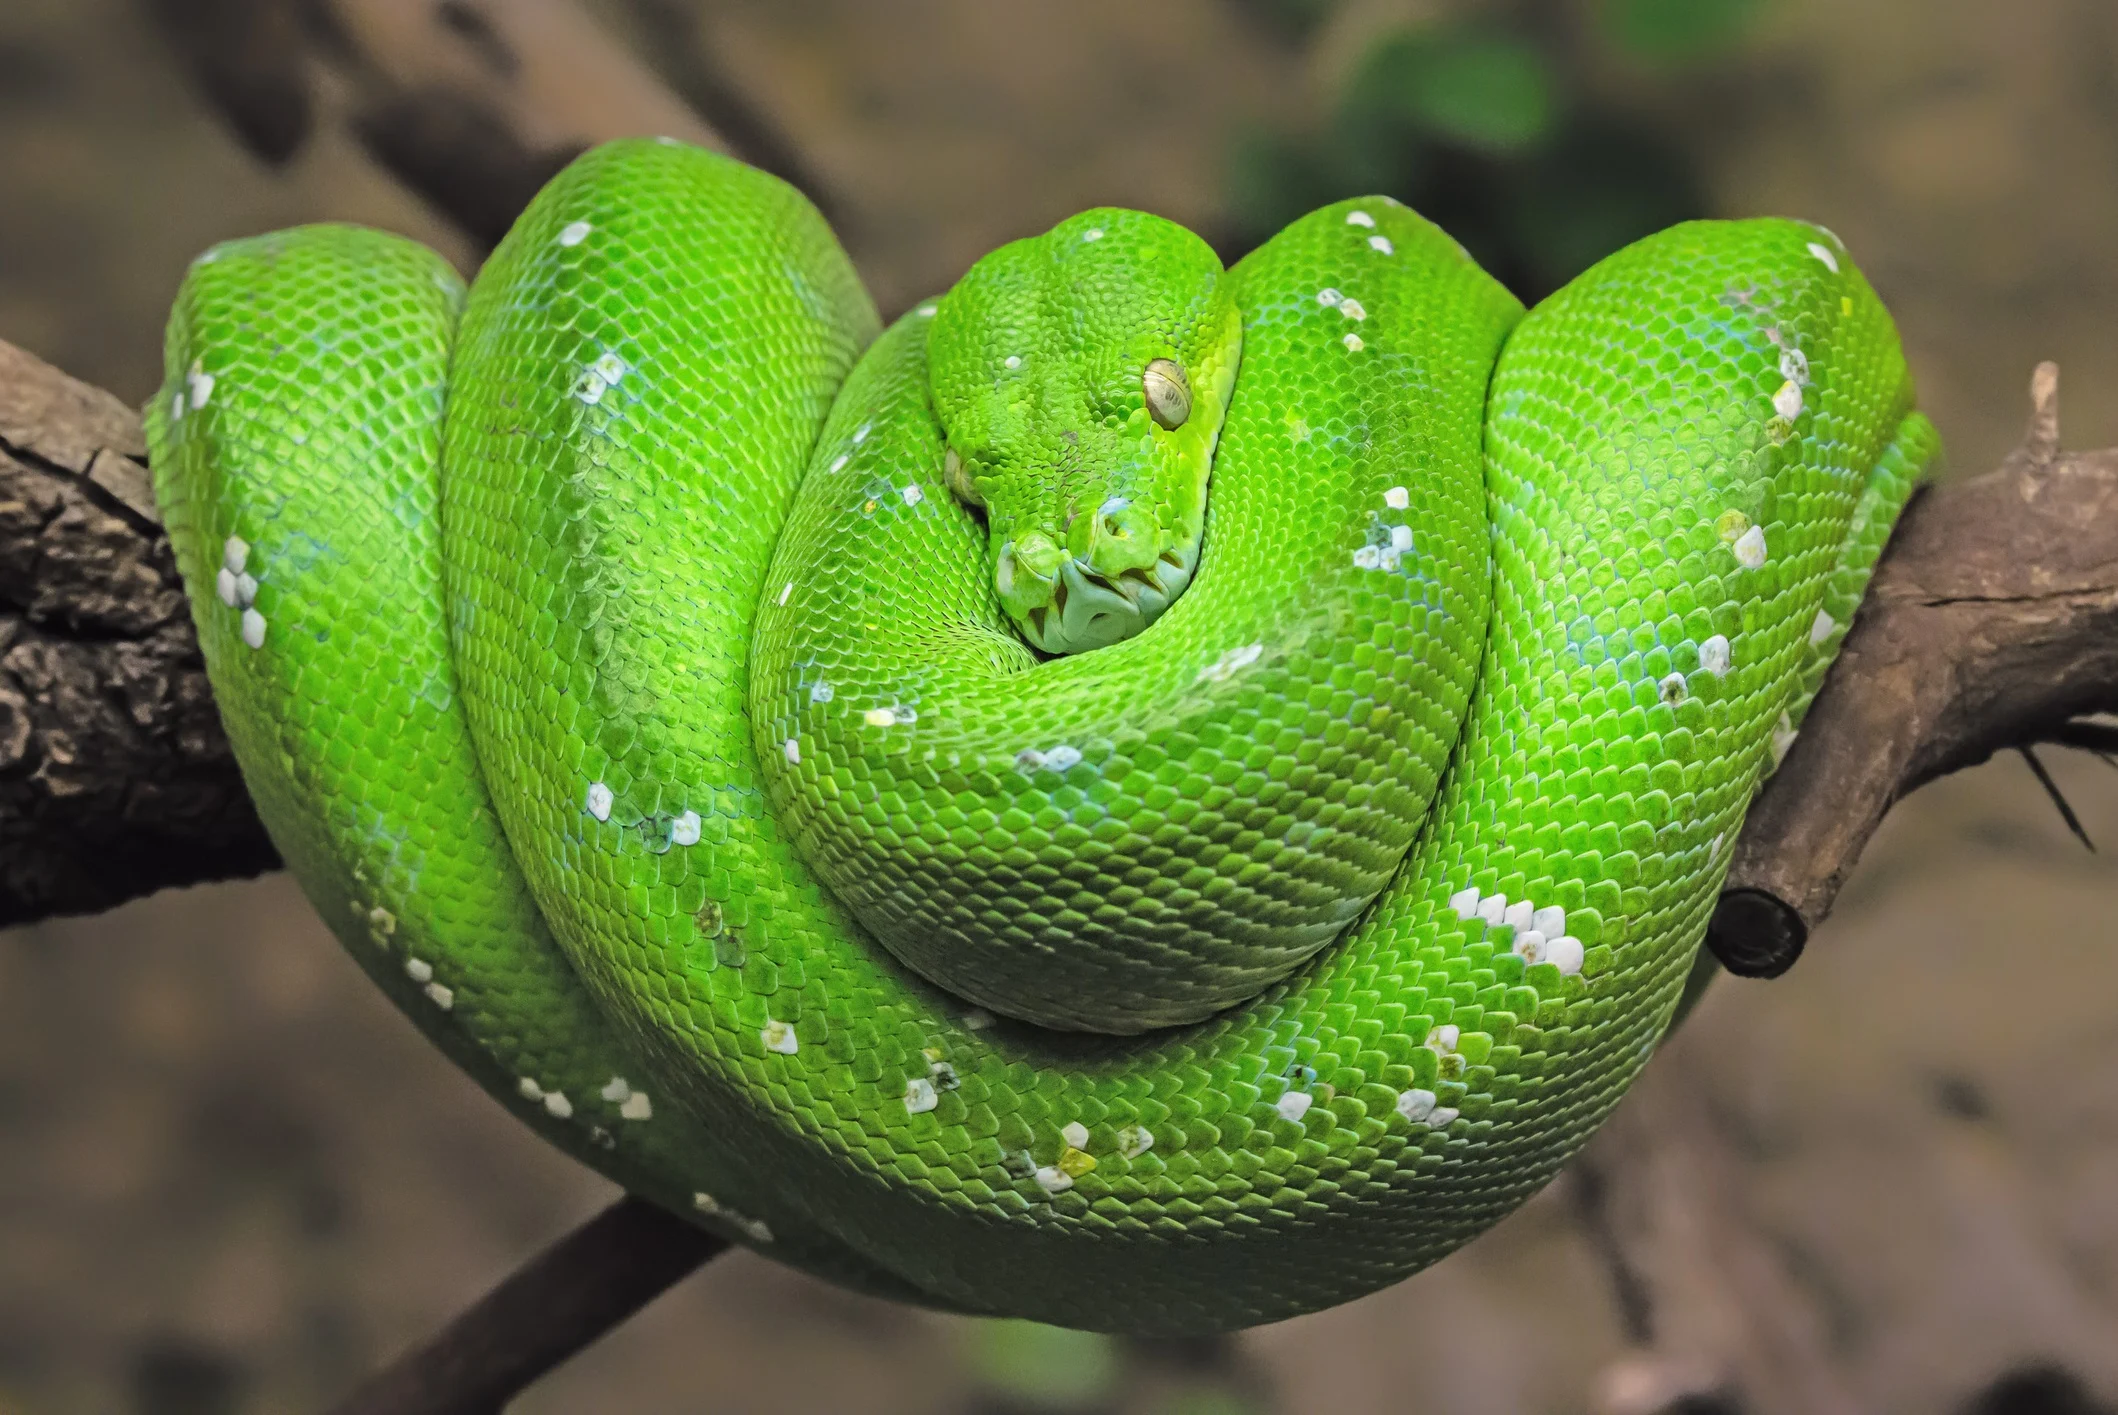 GETTY IMAGES - green tree python